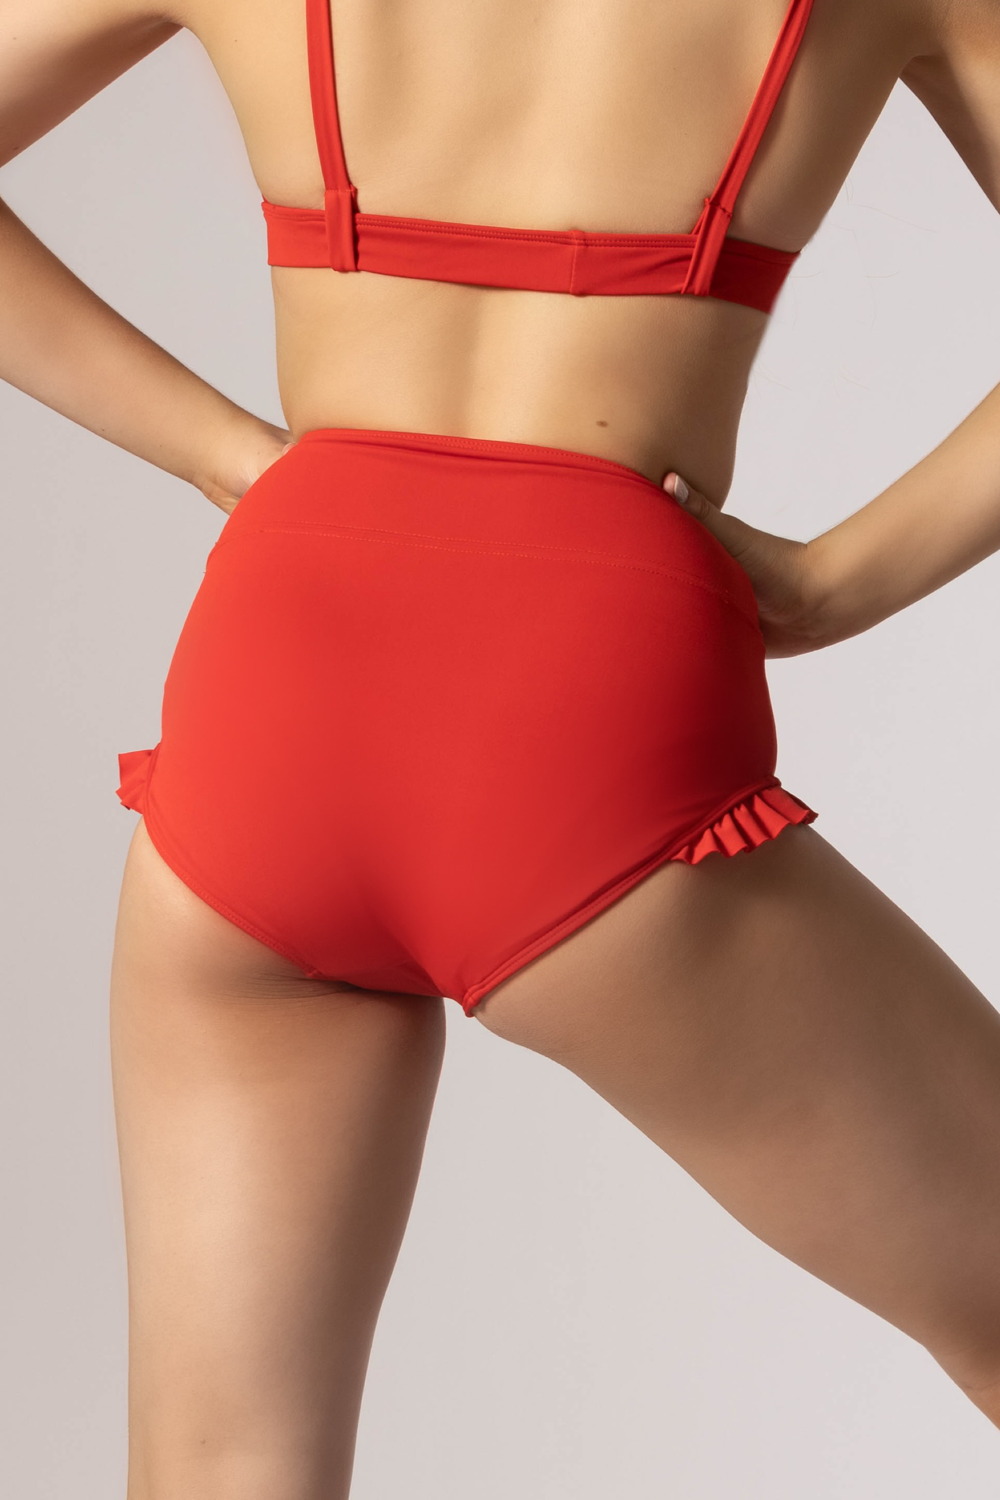 Tiger Friday Online Shop for Filly Briefs - Cherry Dancewear - View : 3